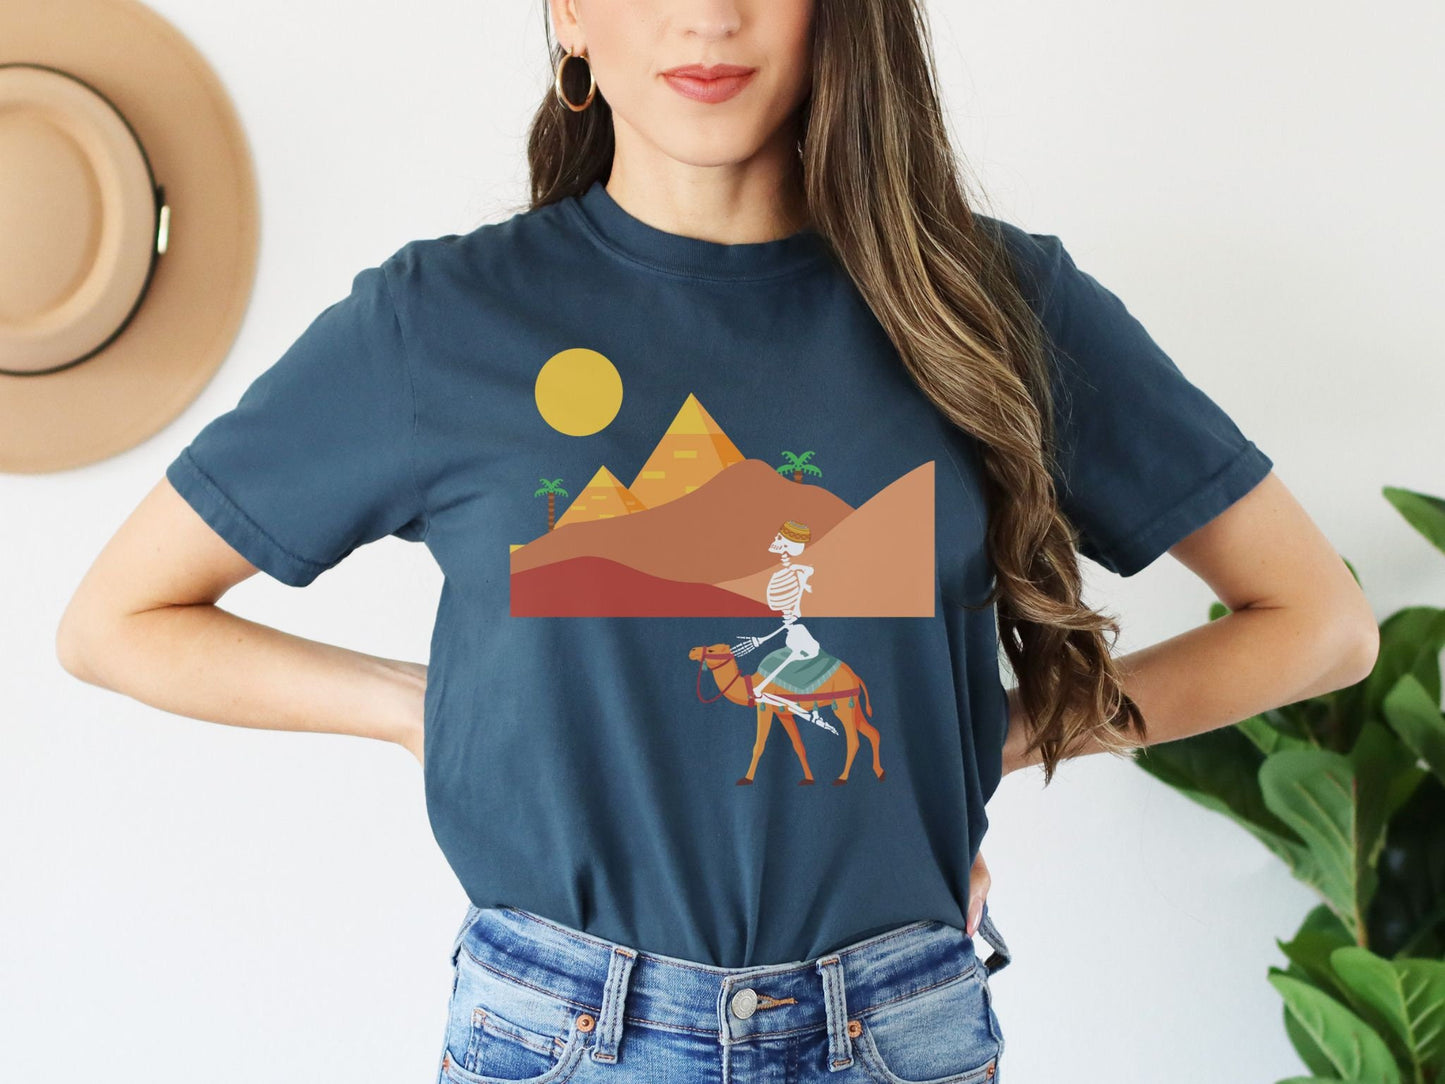 A woman wearing a cute, vintage navy blue colored shirt with a skeleton wearing an Egyptian hat riding a brown camel through the desert, the Egyptian pyramids in the distance behind sand dunes and palm trees with the sun high in the sky.